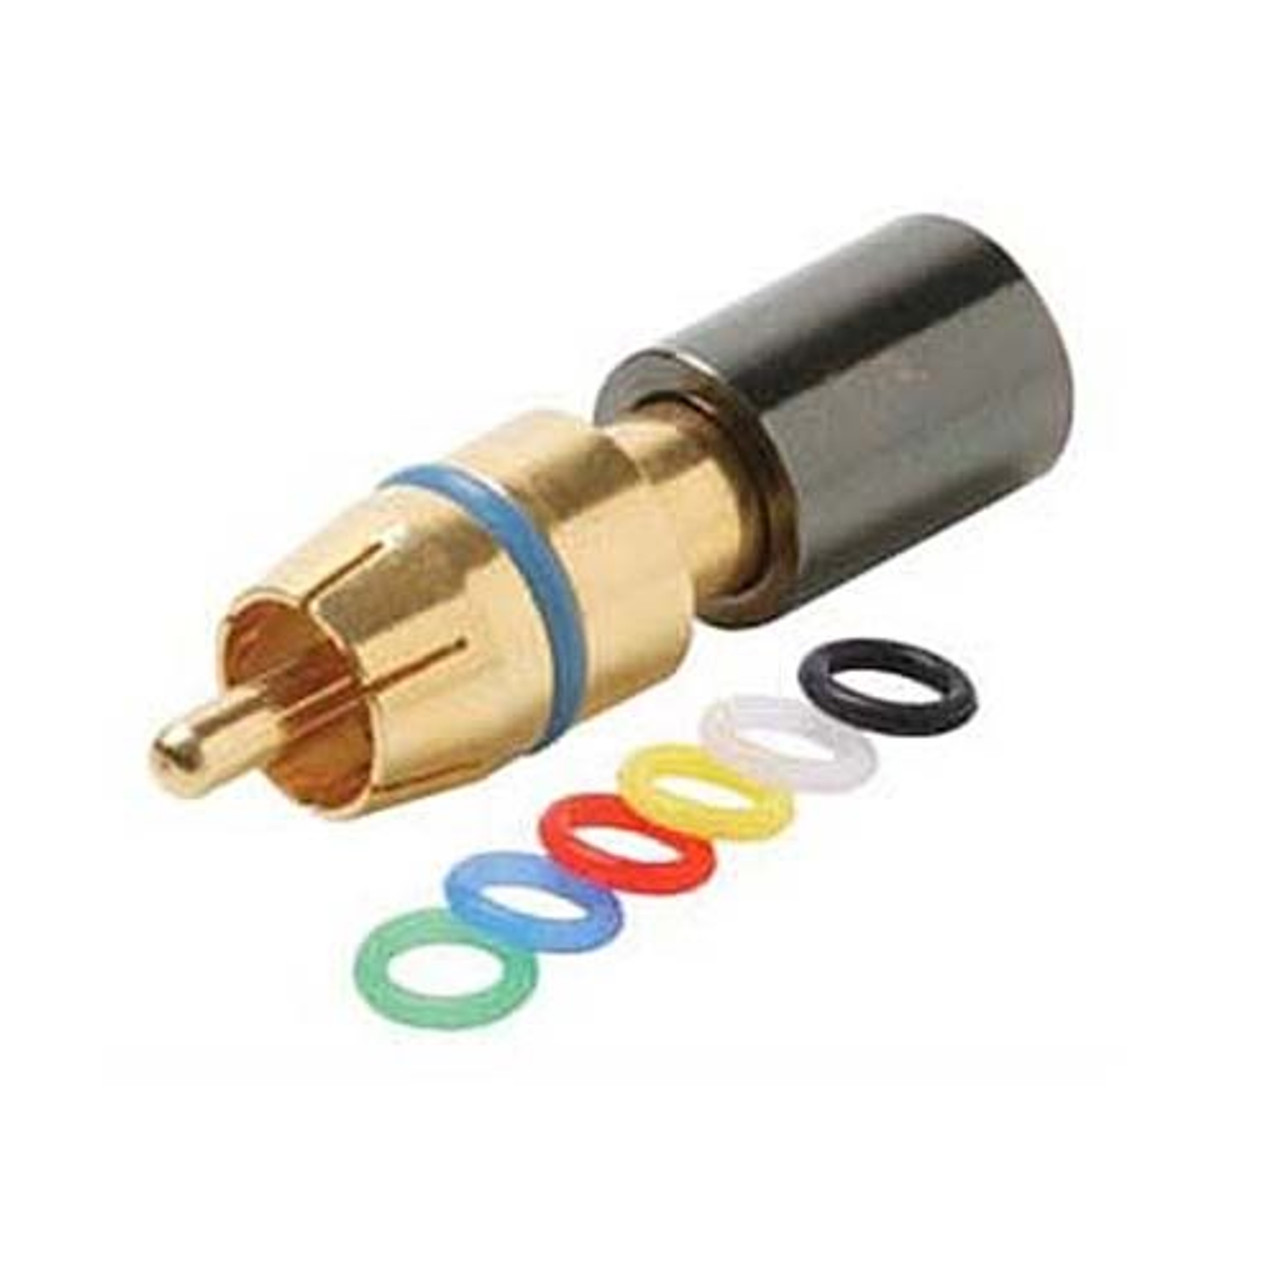 Steren 200-083-10 RG-59 RCA Compression Connector with 6 Color Coded Bands 10 Pack Gold Plated Permaseal II RG59 Female to RCA Male Plug Adapter, RF Digital Commercial AV Component, Part # 200083-10